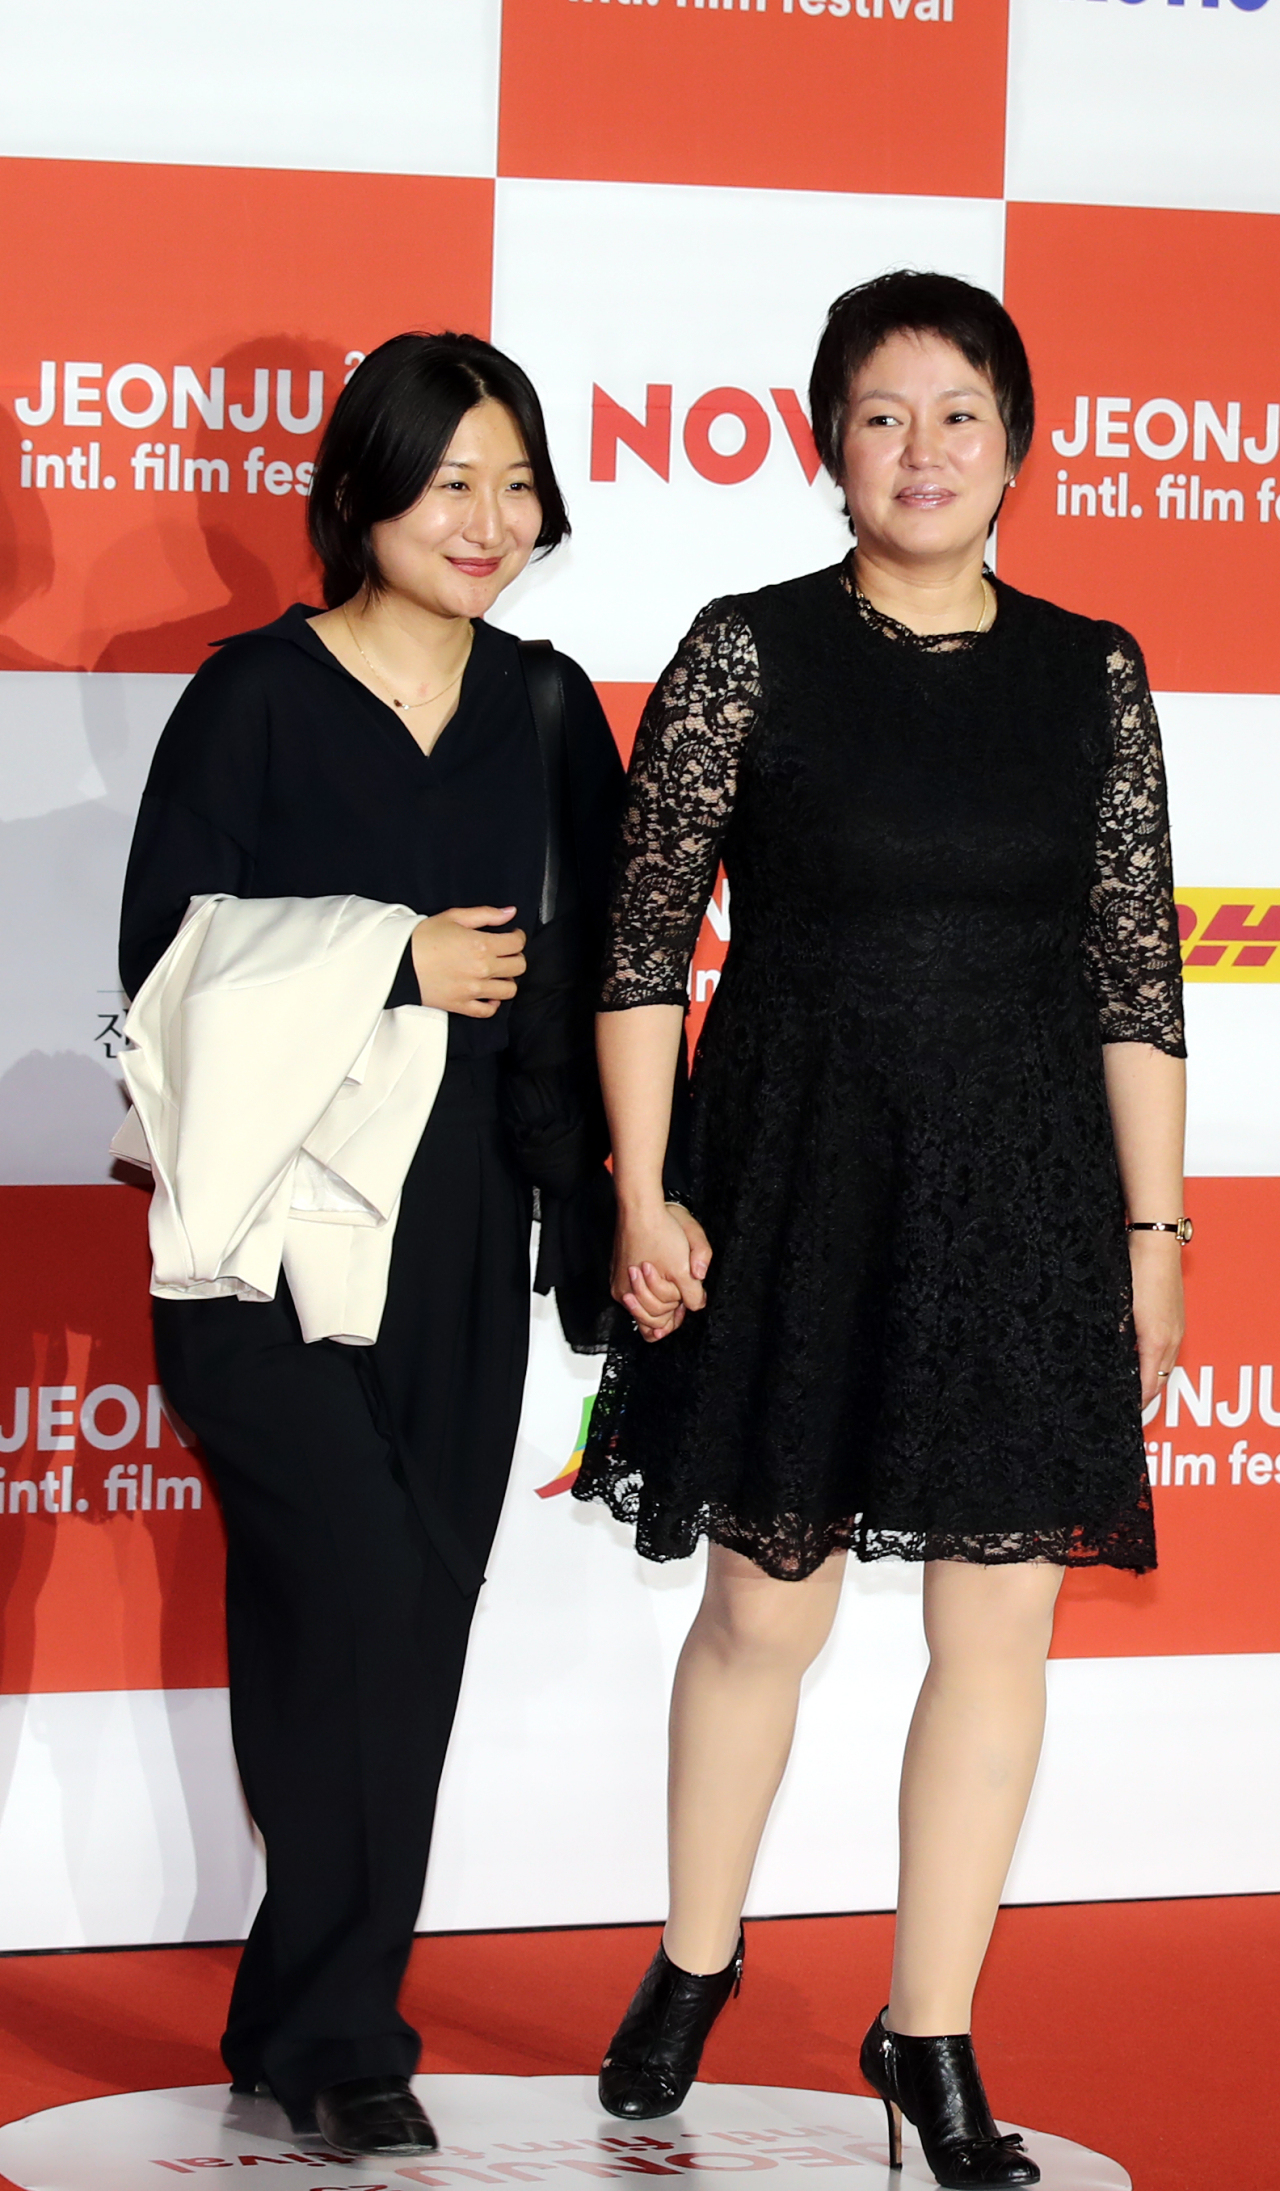 Director Jeong Ji-hye (left) and actor Kim Geum-soon from “Jeong-sun,” pose at the opening ceremony of the 23rd Jeonju International Filn Festival in Jeonju, North Jeolla Province on April 28. (Yonhap)